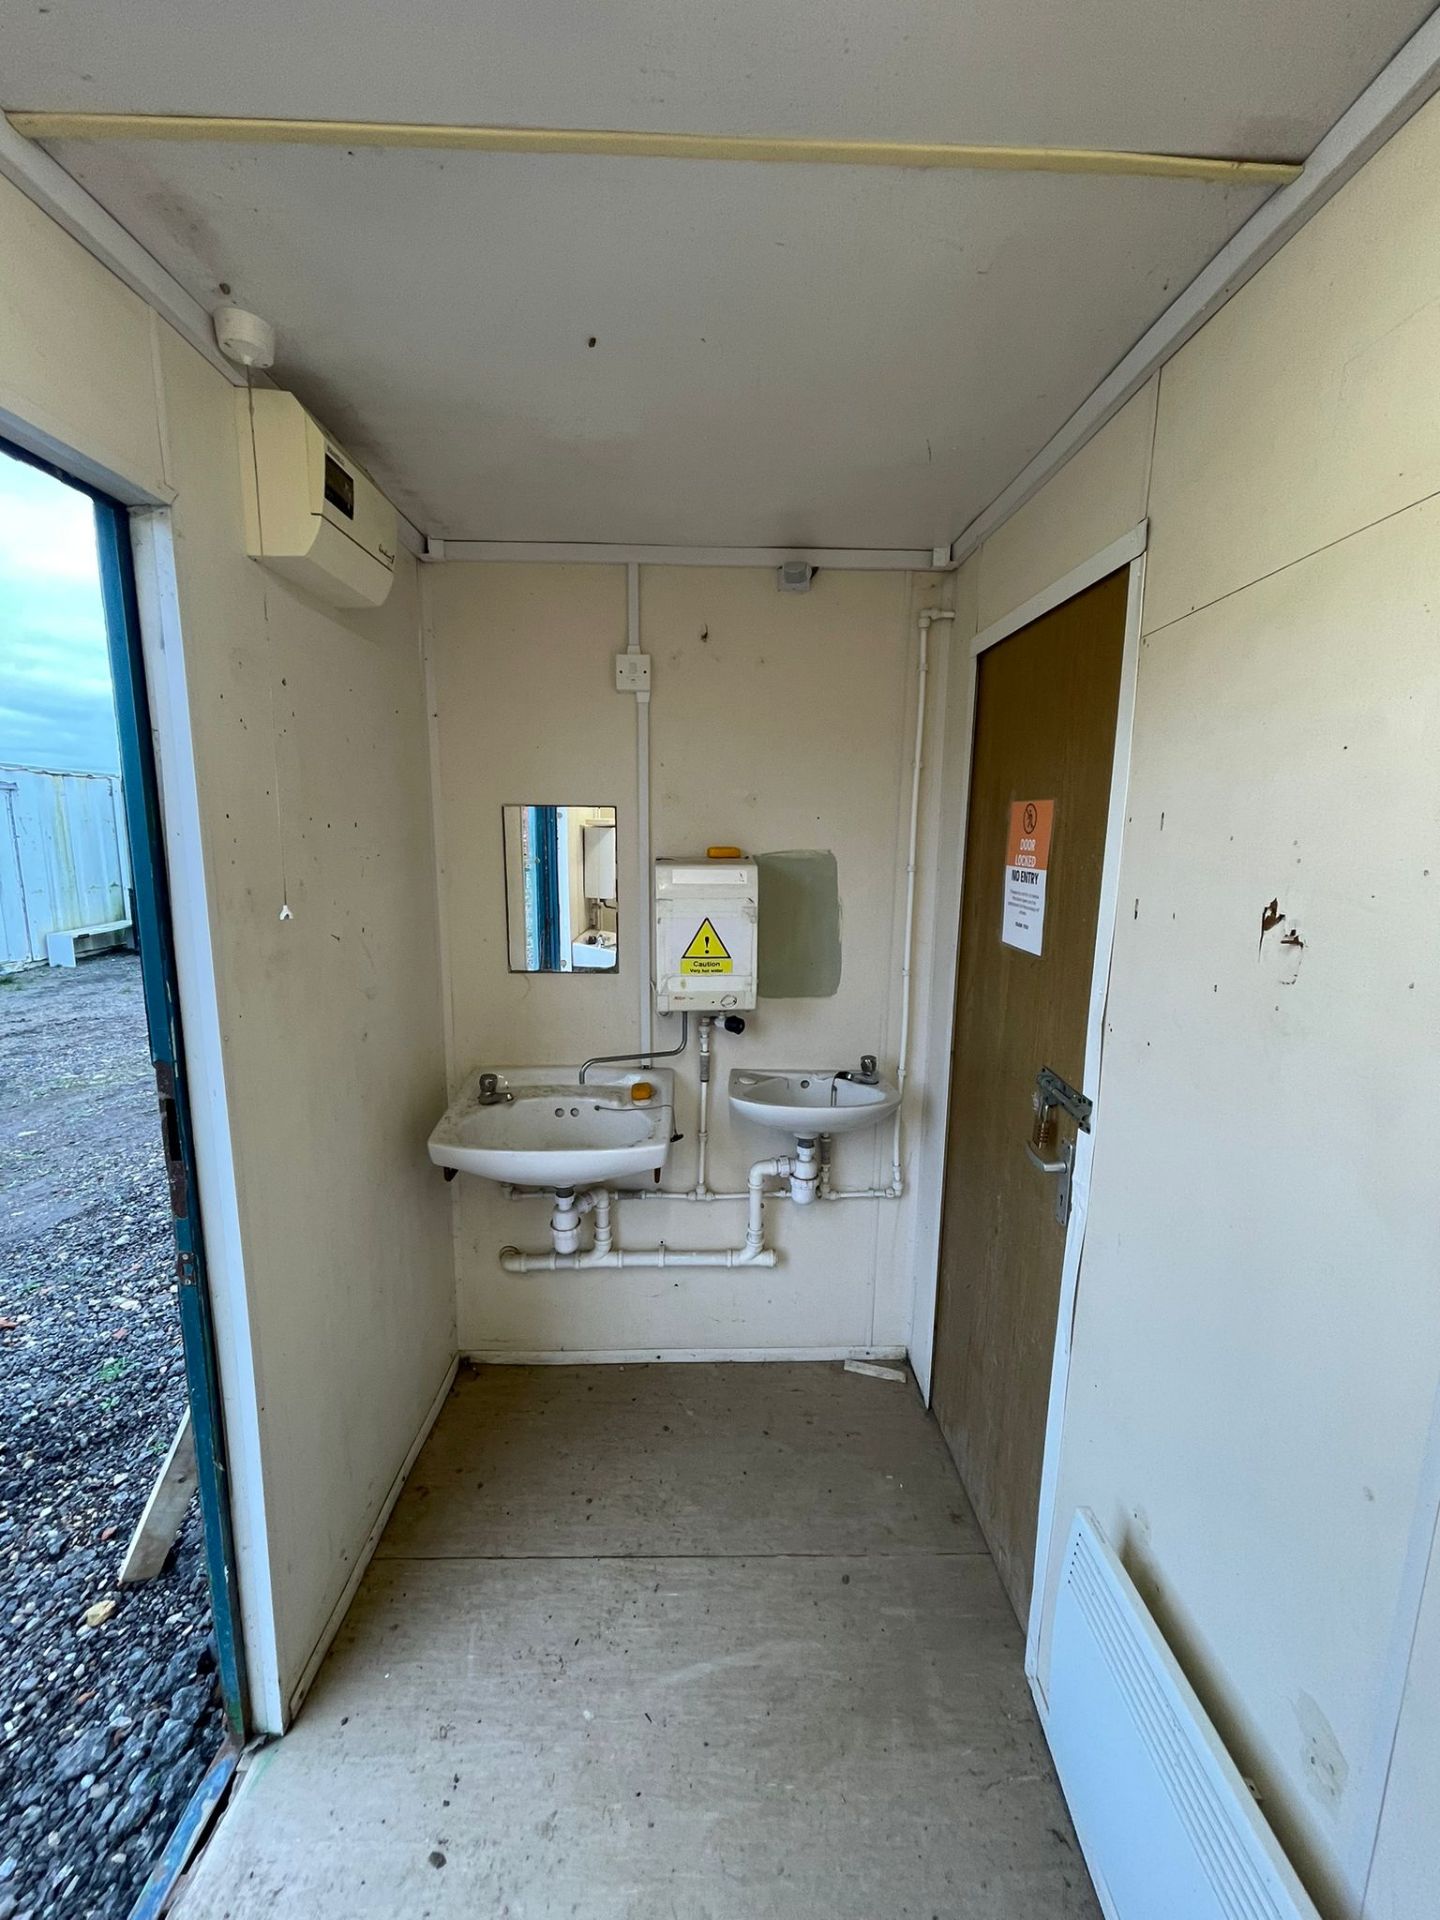 16X10FT TOILET BLOCK - 1X DISABLED/WOMEN’S TOILET - 3X MALES TOILET AND 3X URINALS - Image 6 of 8